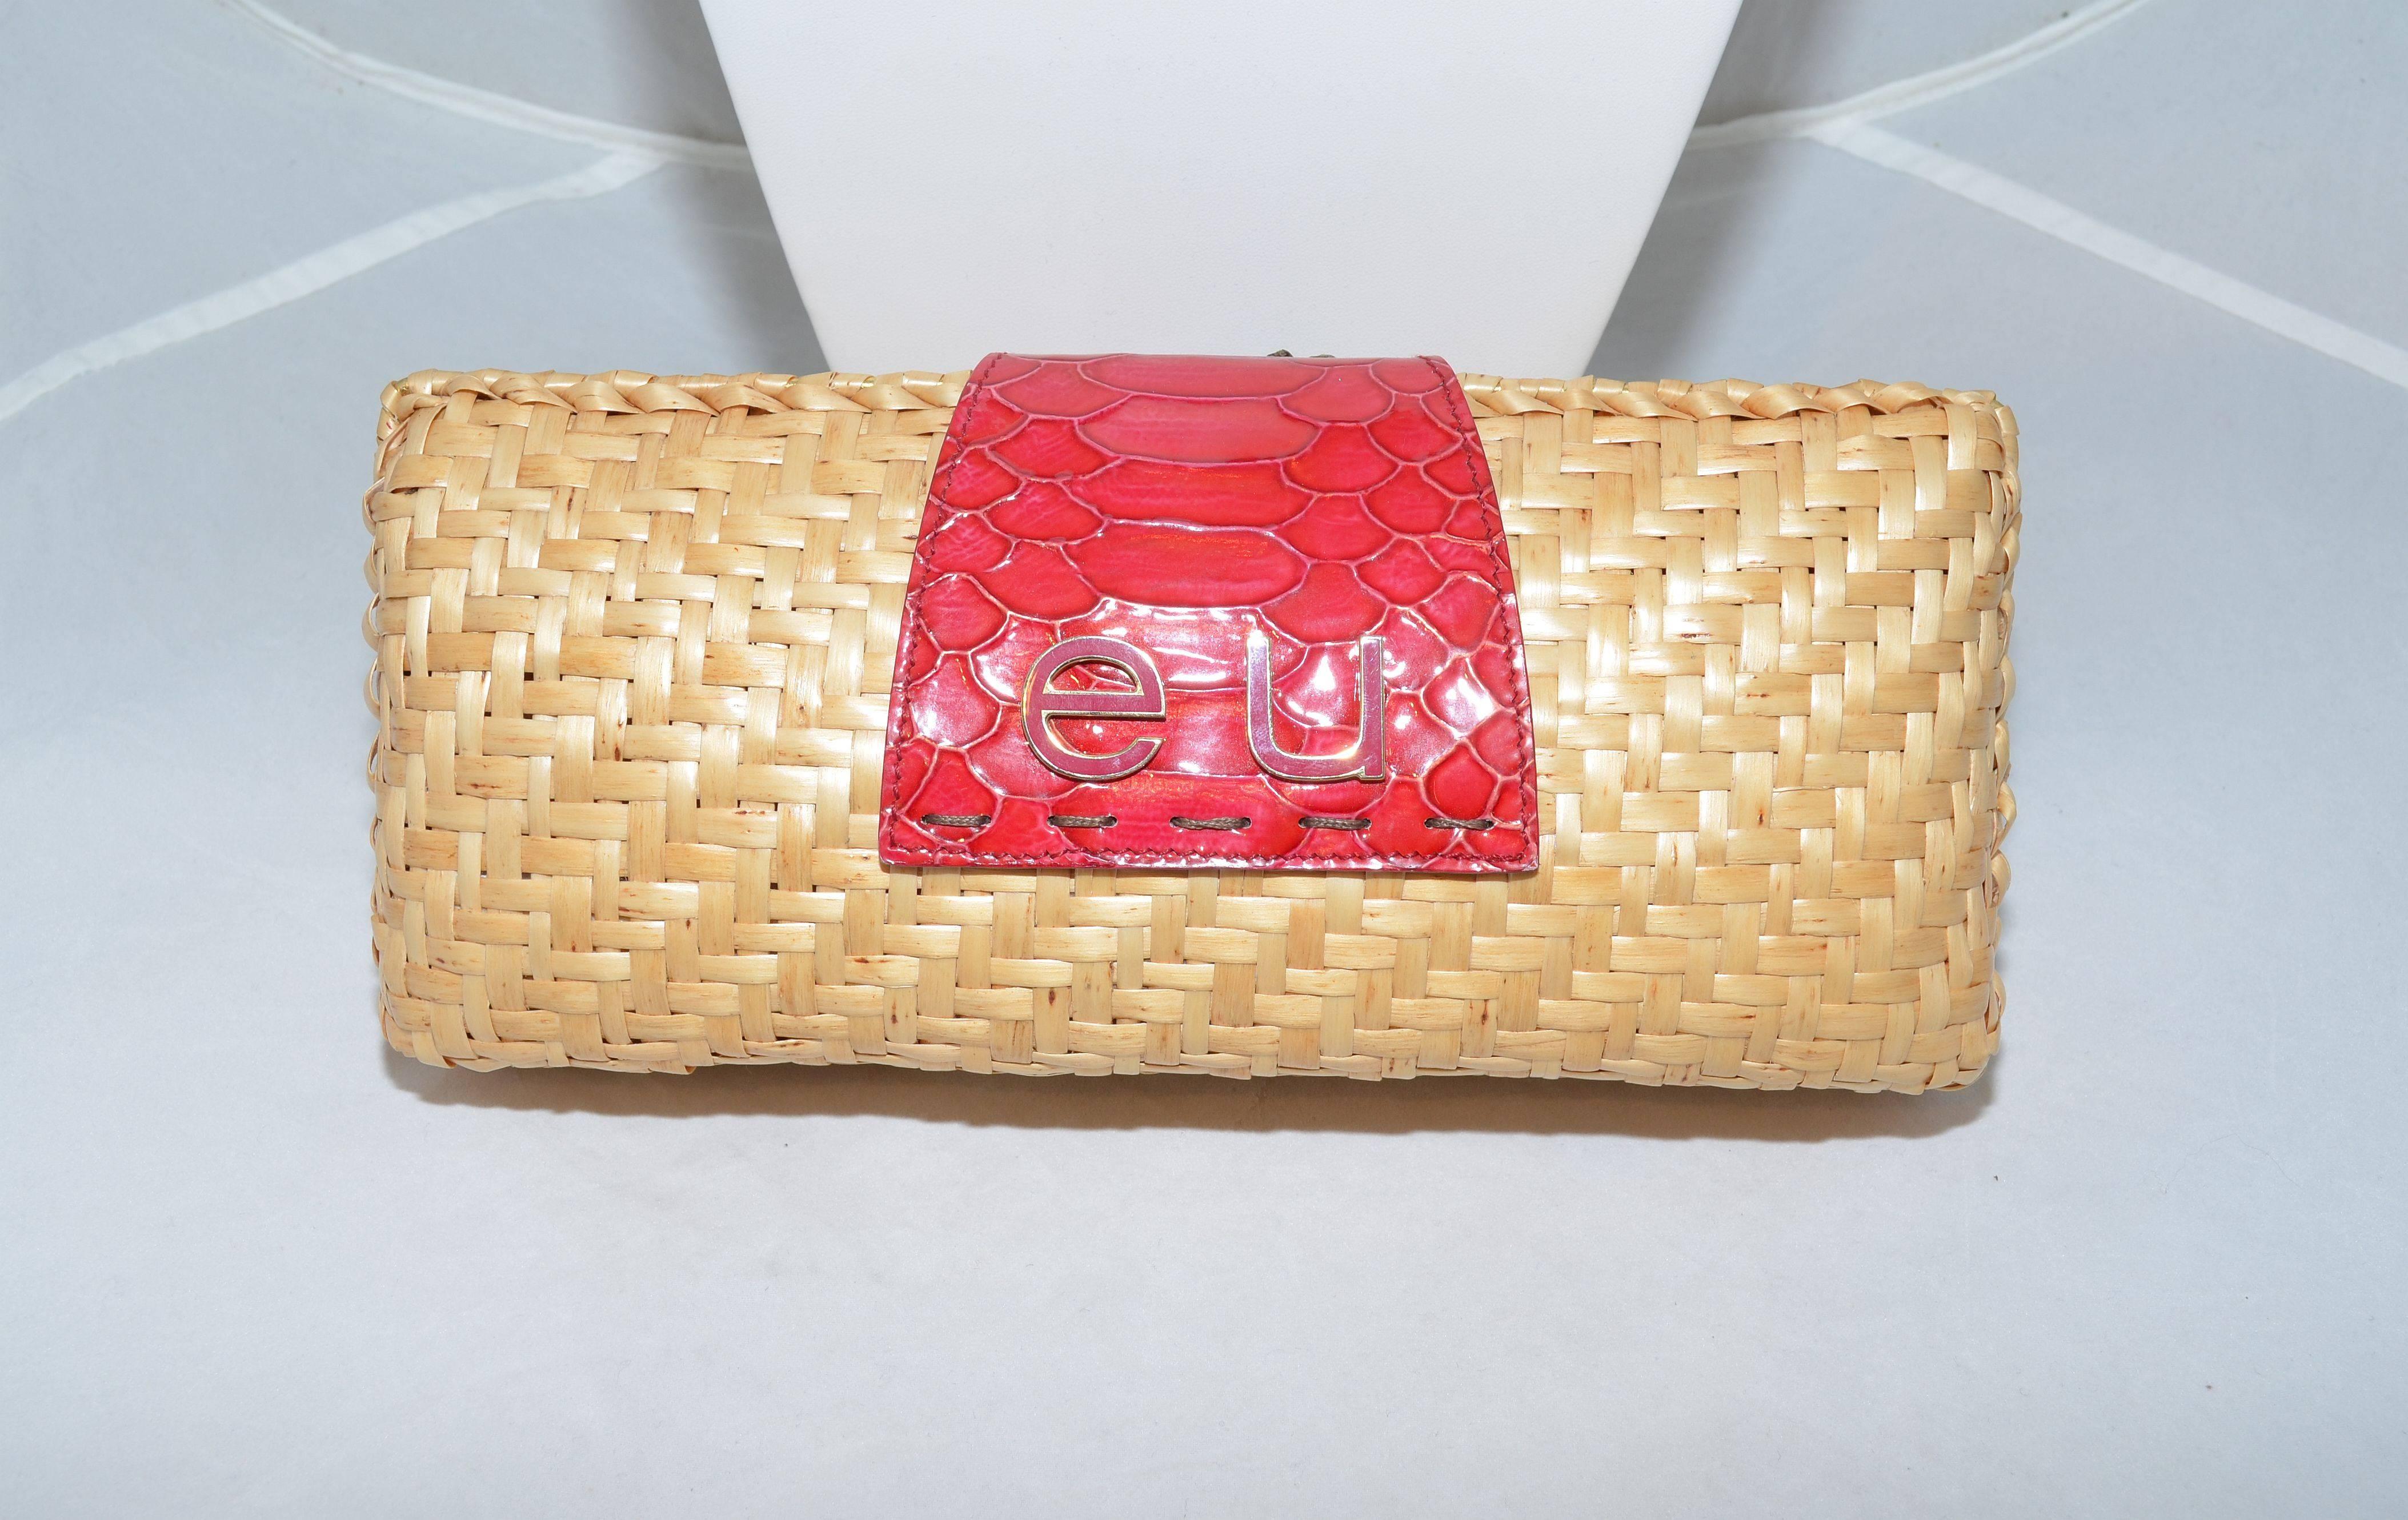 Emanuel Ungaro Woven Wicker Cherry Clutch Purse

Emanuel Ungaro wicker clutch has a patent red pressed leather strap flap closure with cherry fruit detail, concealed magnetic snap stud closure. Clutch has a patent leather and nylon lining with one